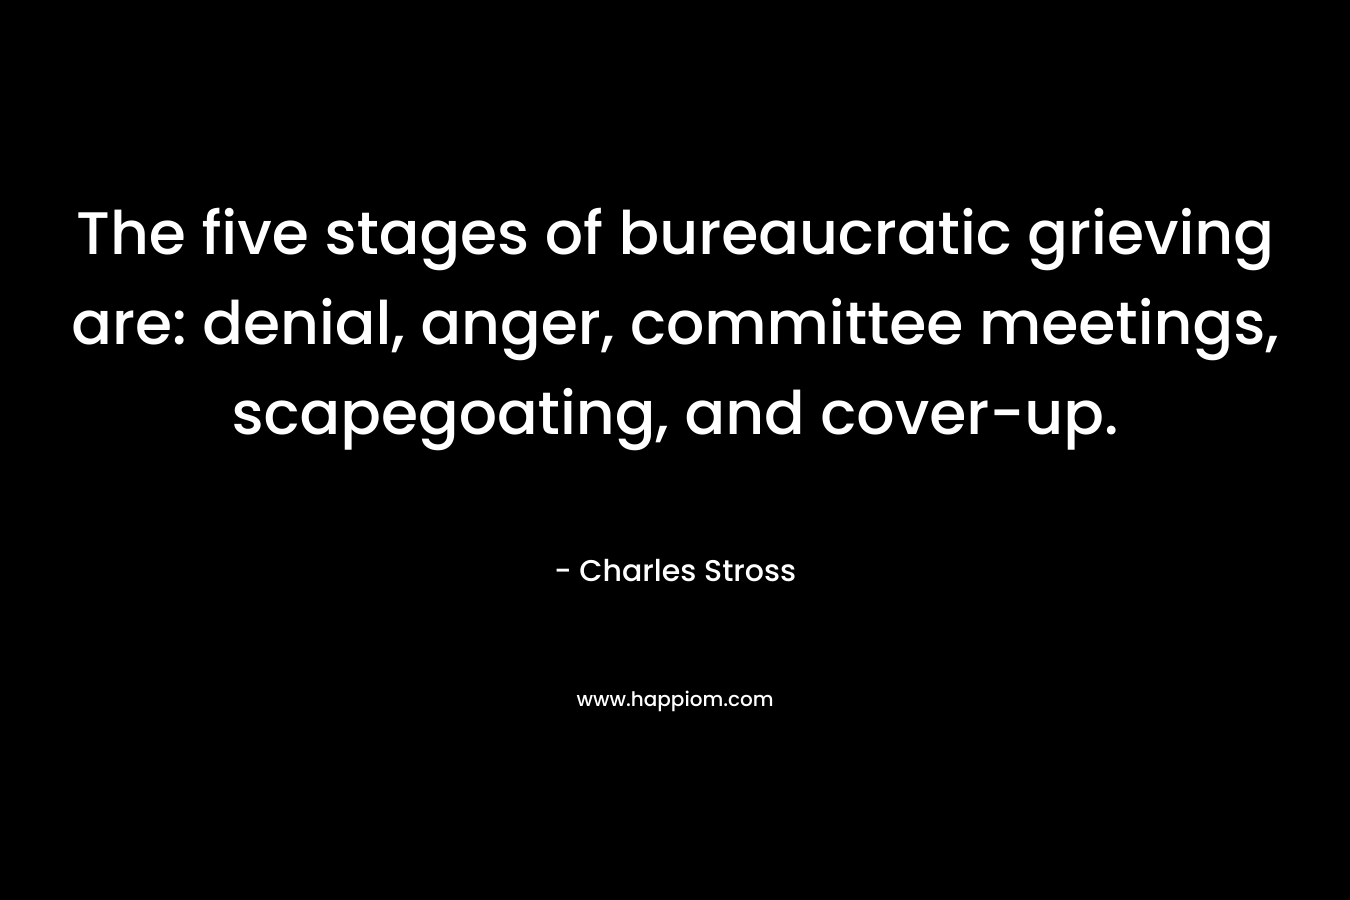 The five stages of bureaucratic grieving are: denial, anger, committee meetings, scapegoating, and cover-up.